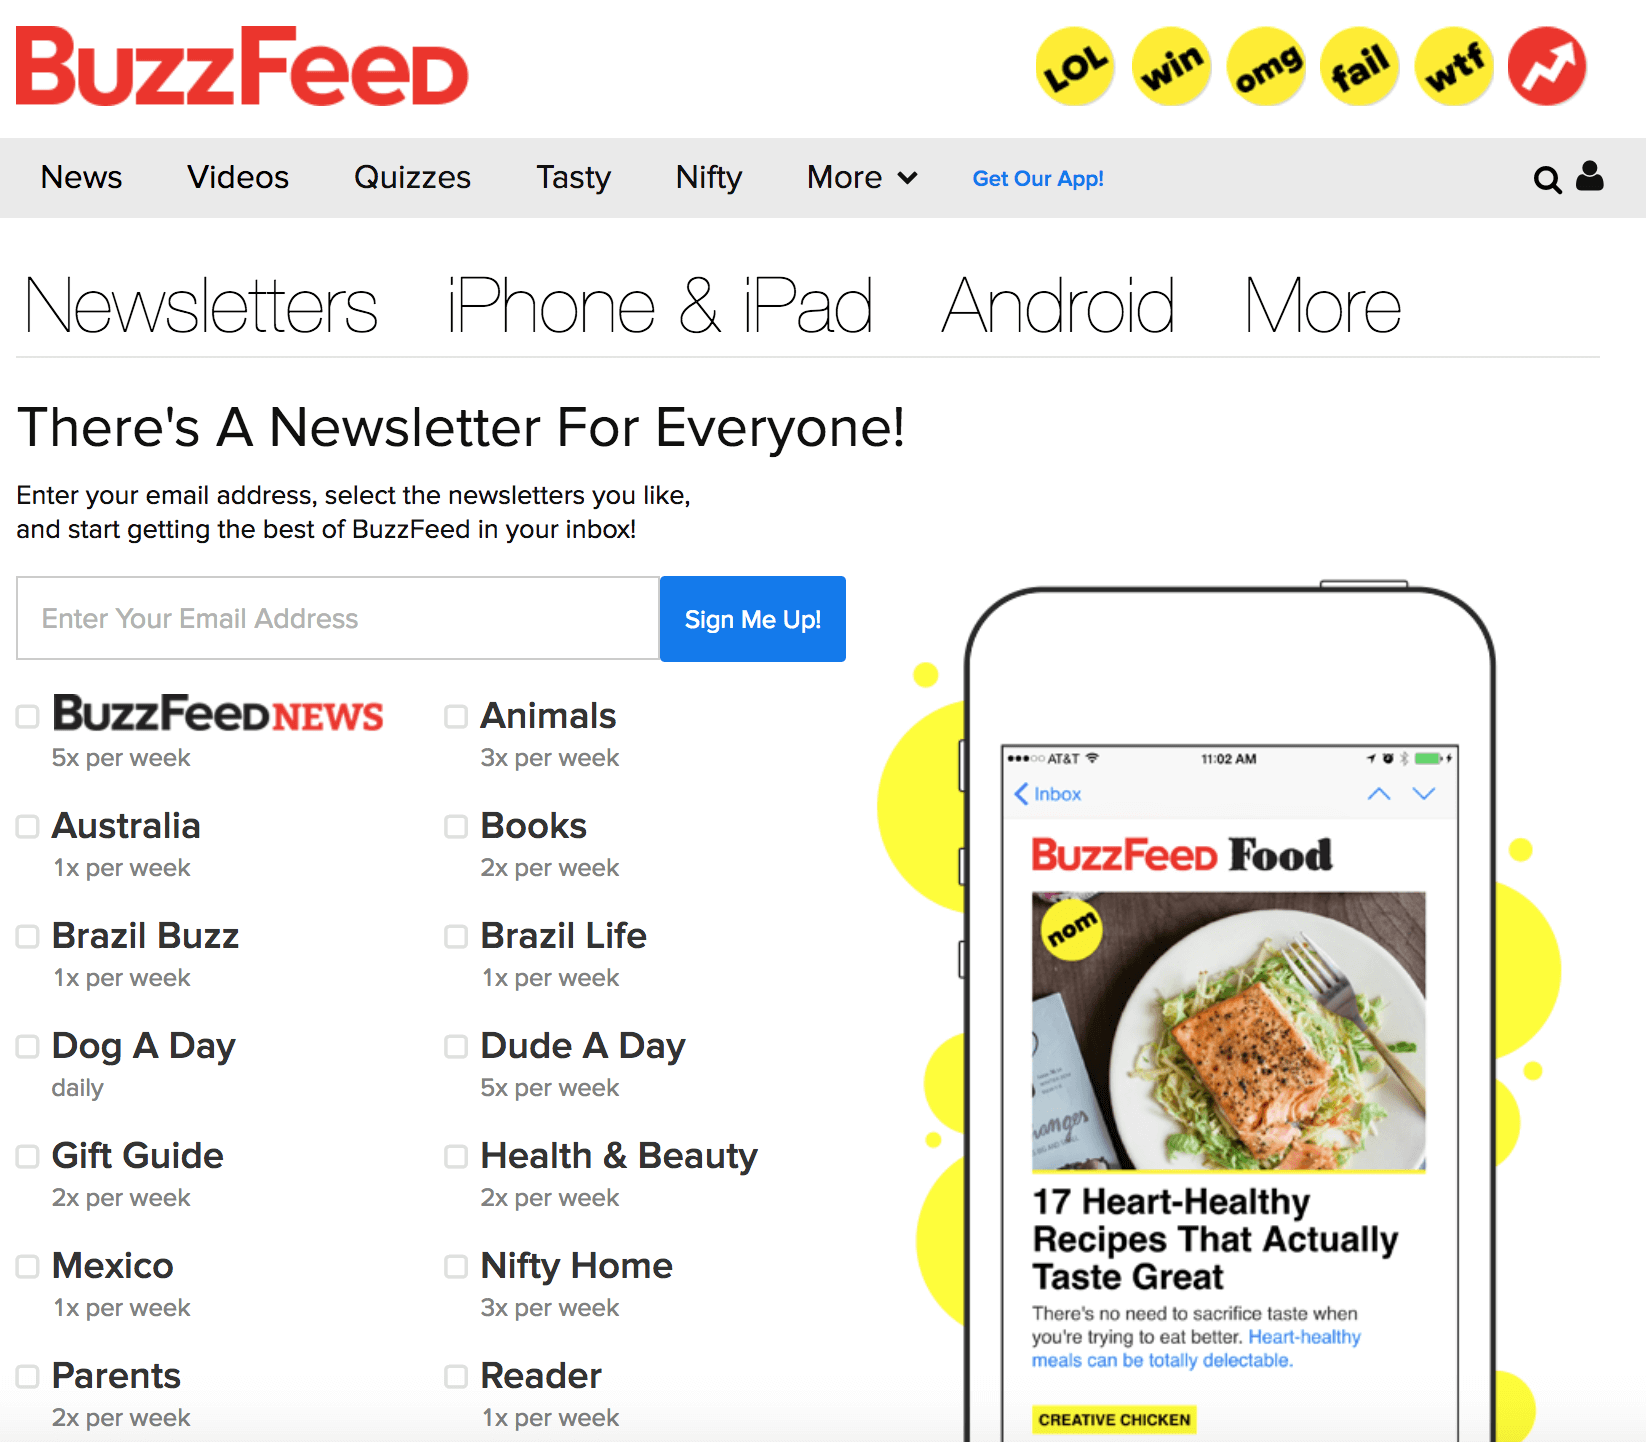 BuzzFeed.png